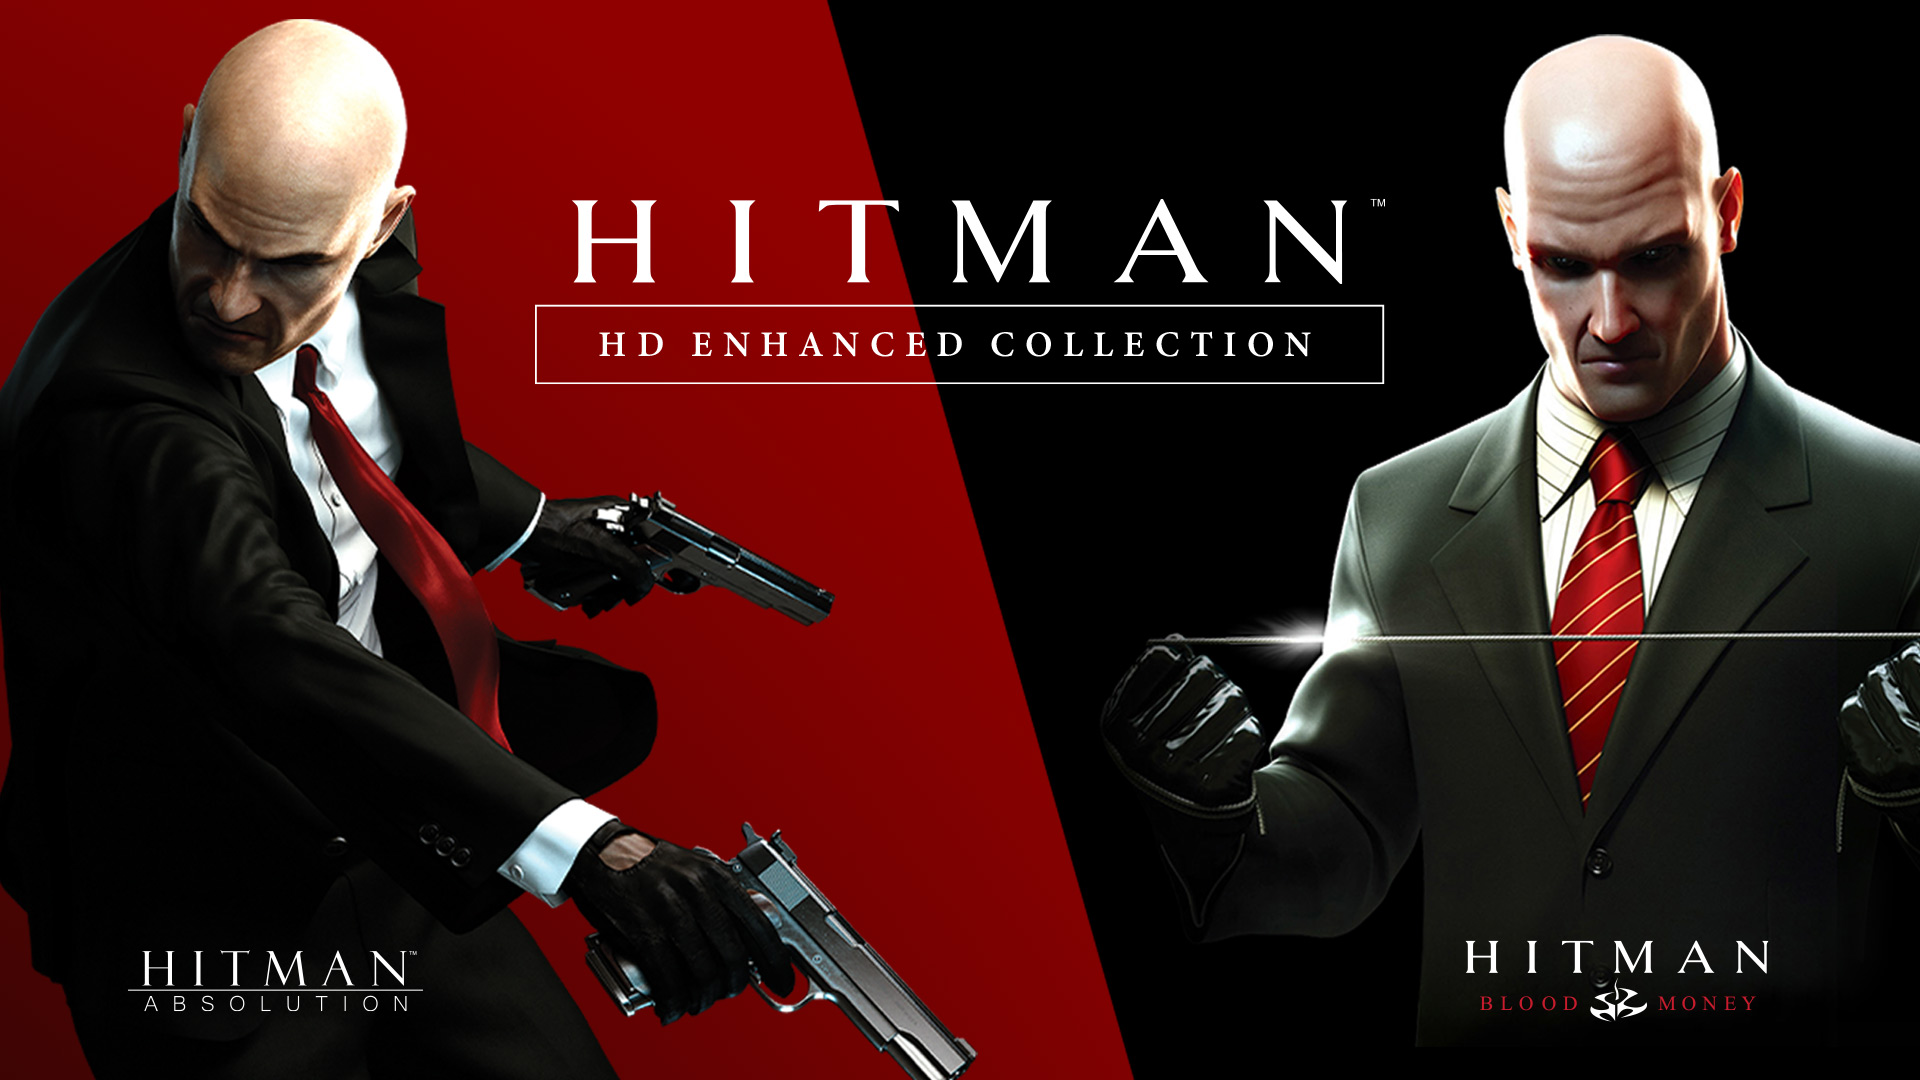 Hitman: Absolution is a 2012 stealth video game developed by IO Interactive and published by Square Enix's European subsidiary. It is the fifth installment in the Hitman series and the sequel to 2006's Hitman: Blood Money. 